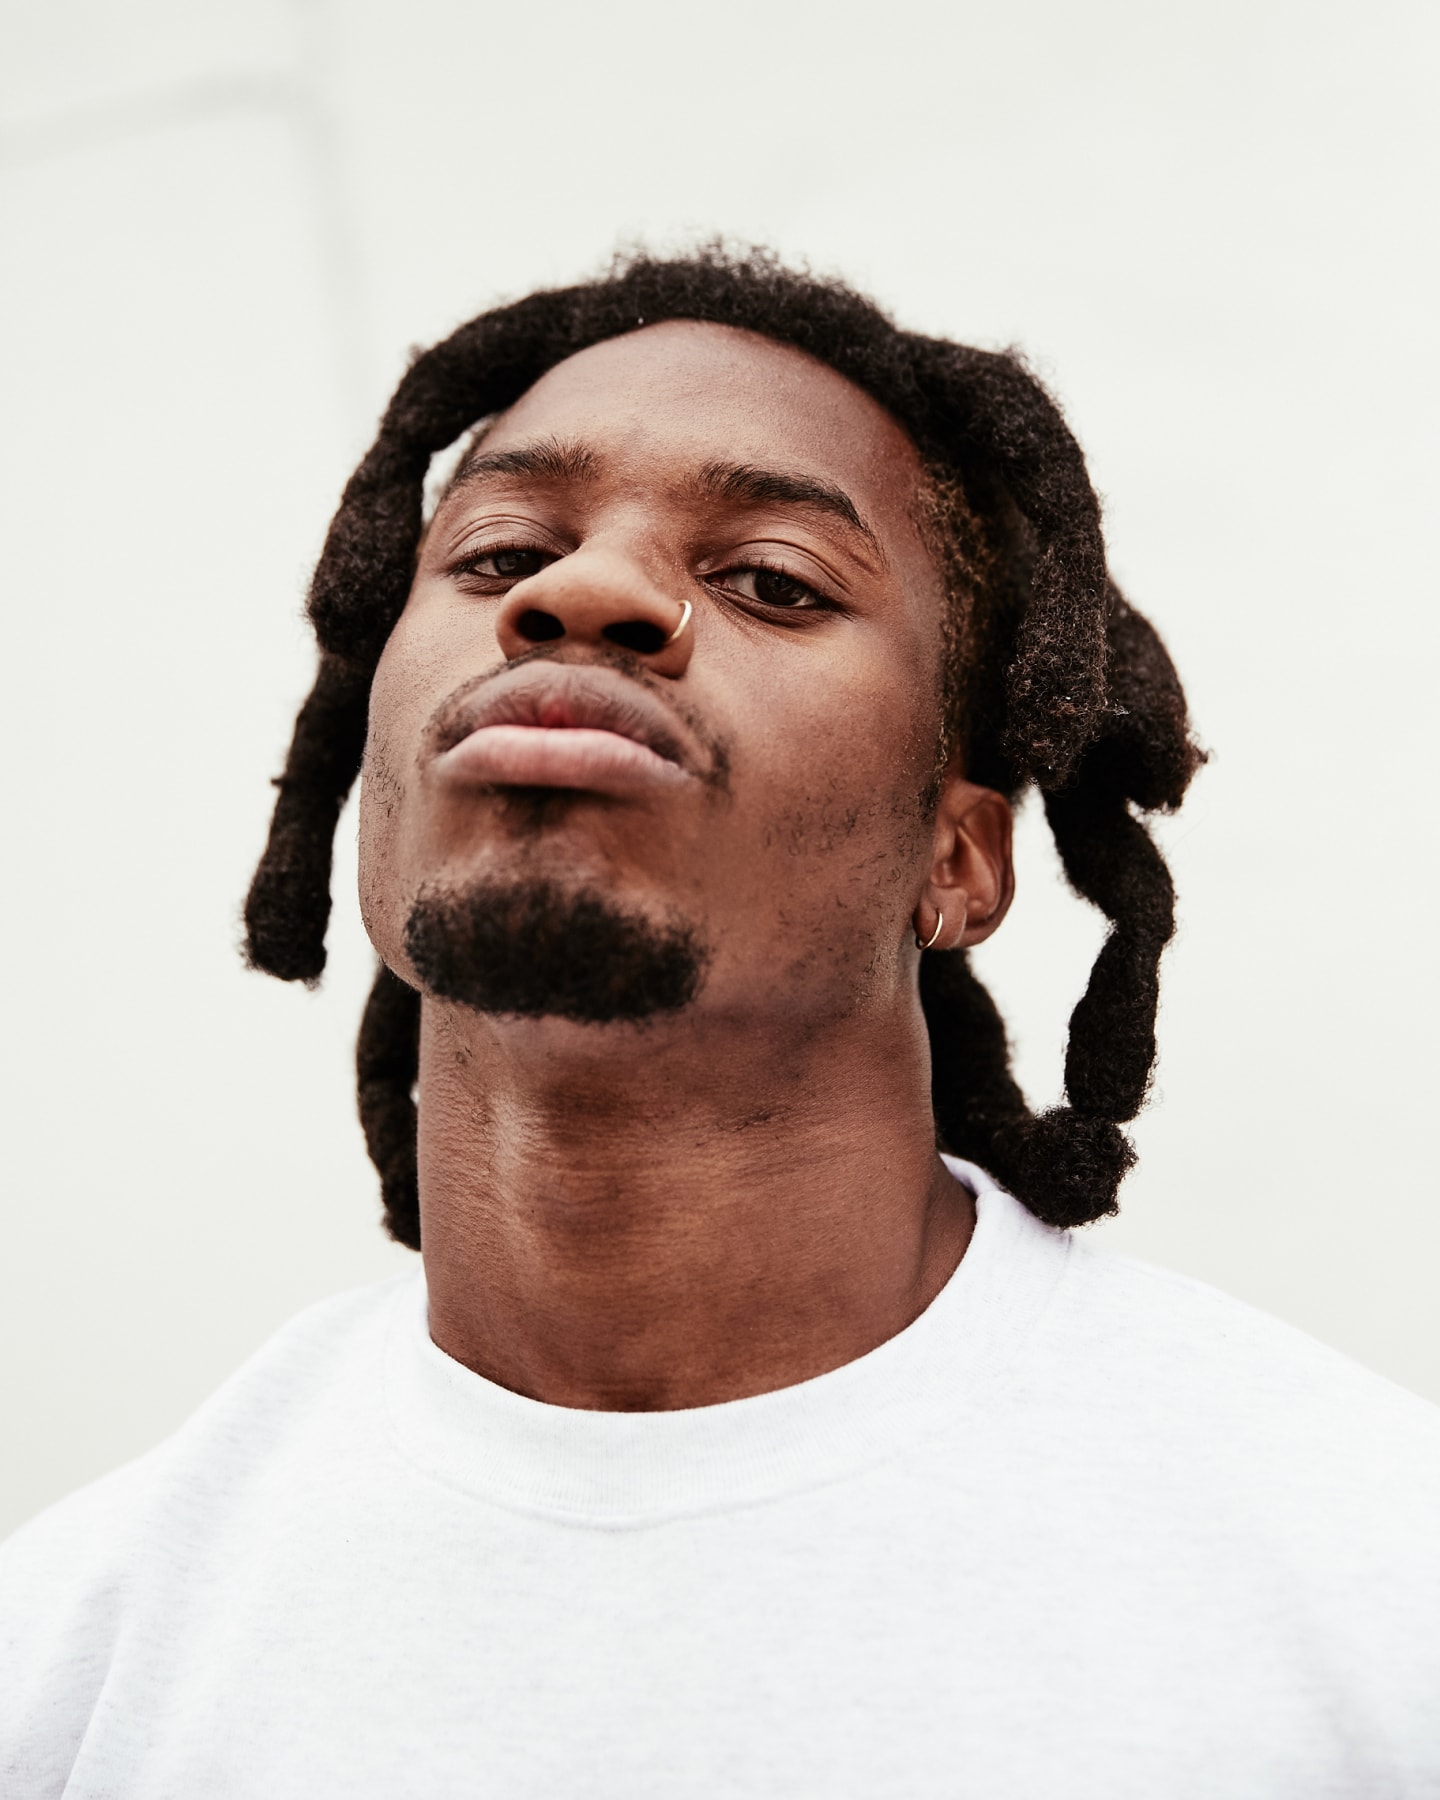 Denzel Curry channeled homesickness to make a Miami masterpiece